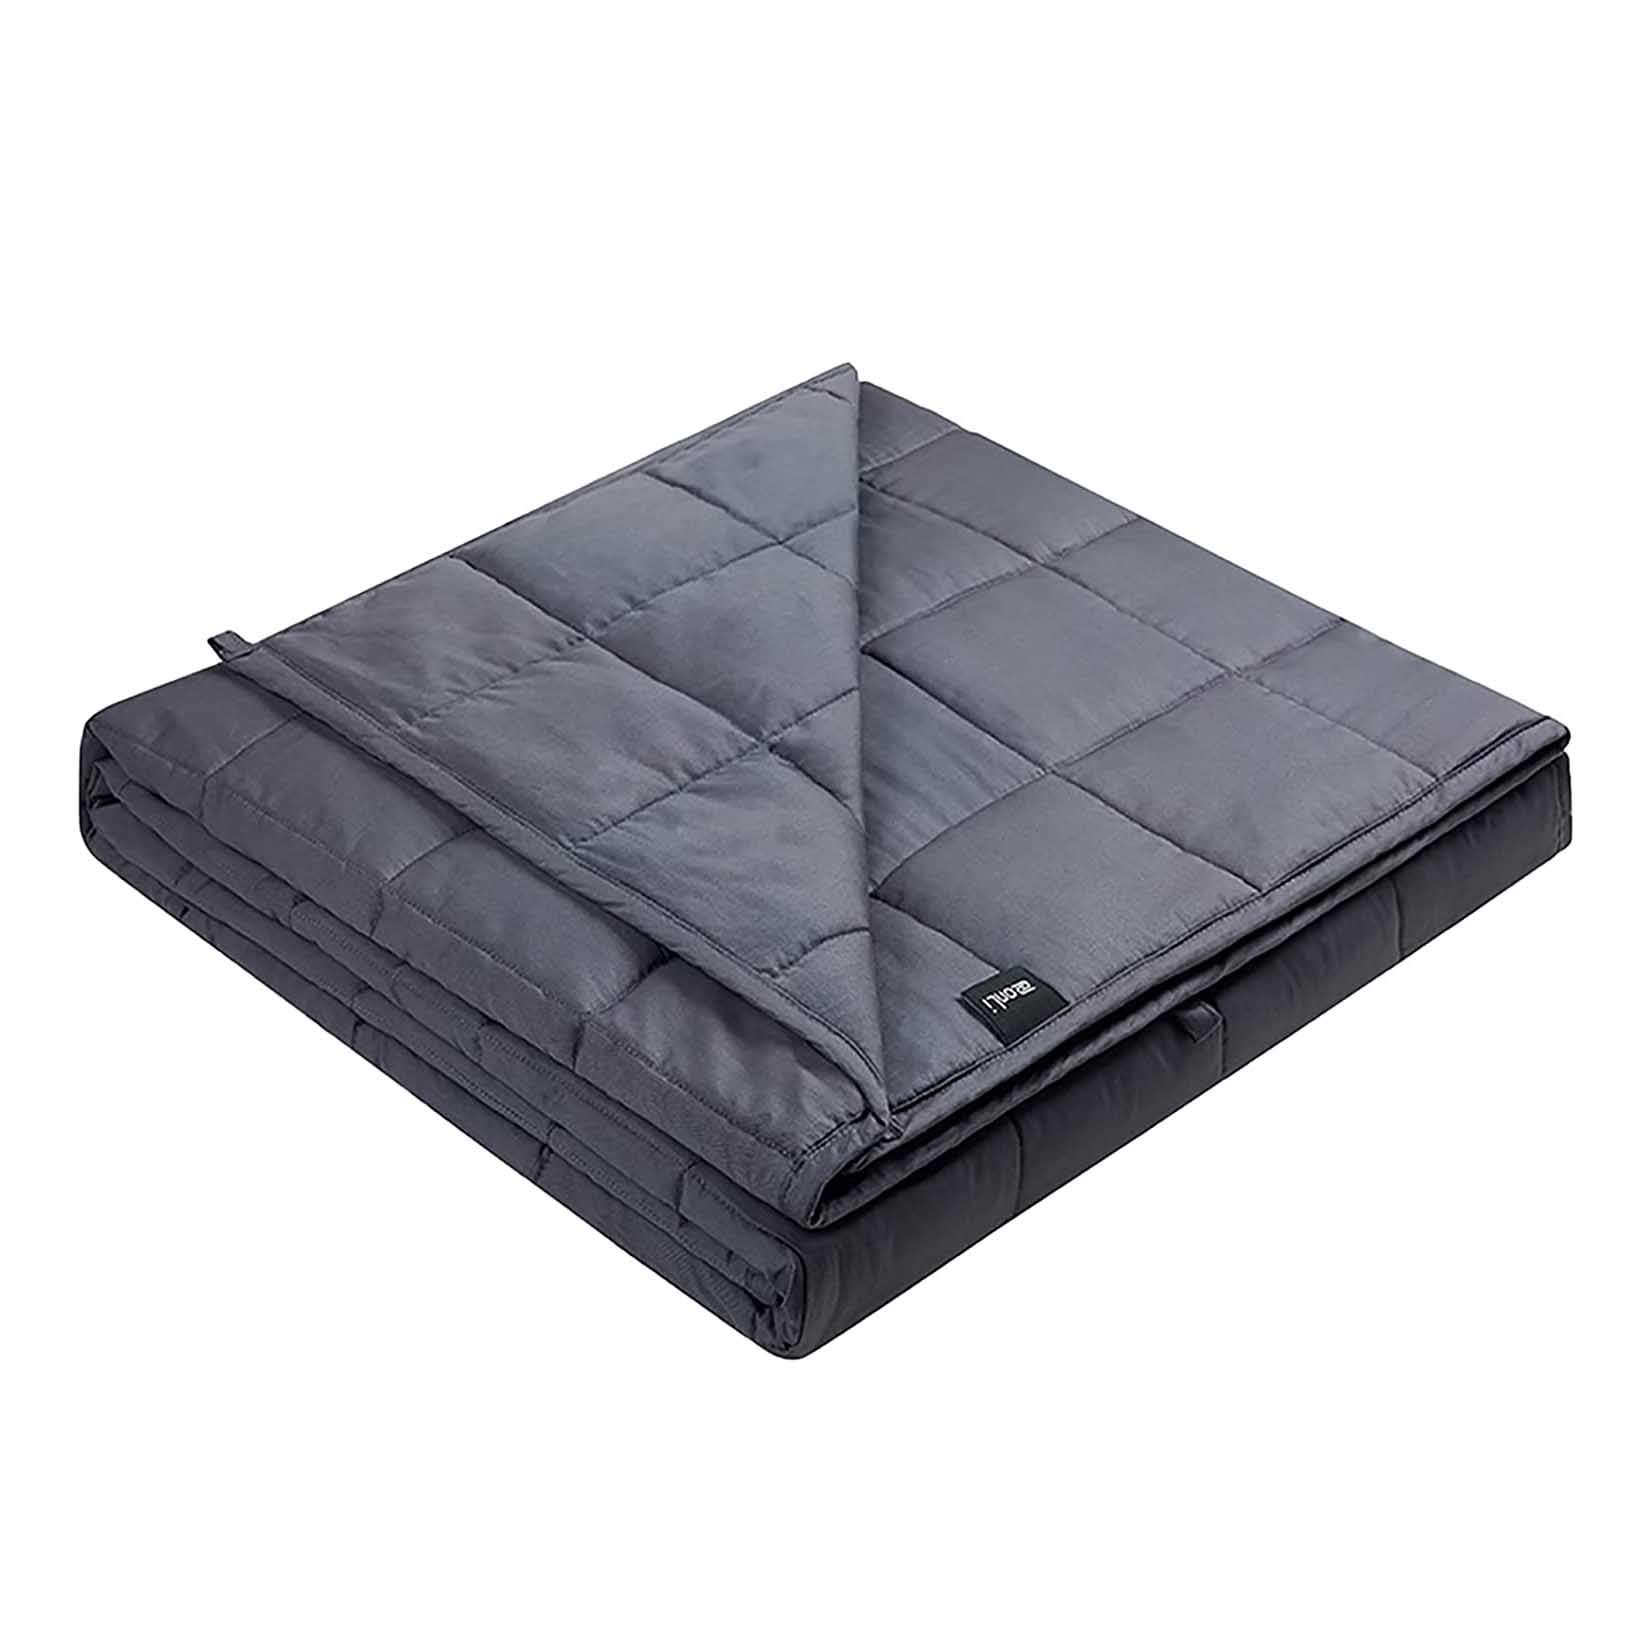 ODM Discount Knitted Weighted Blanket Exporter- Weighted Blanket (60”x80”, 20lbs, Dark Grey), Cooling Weighted Blanket for Adults, High Breathability Heavy Blanket, Soft Material with ...